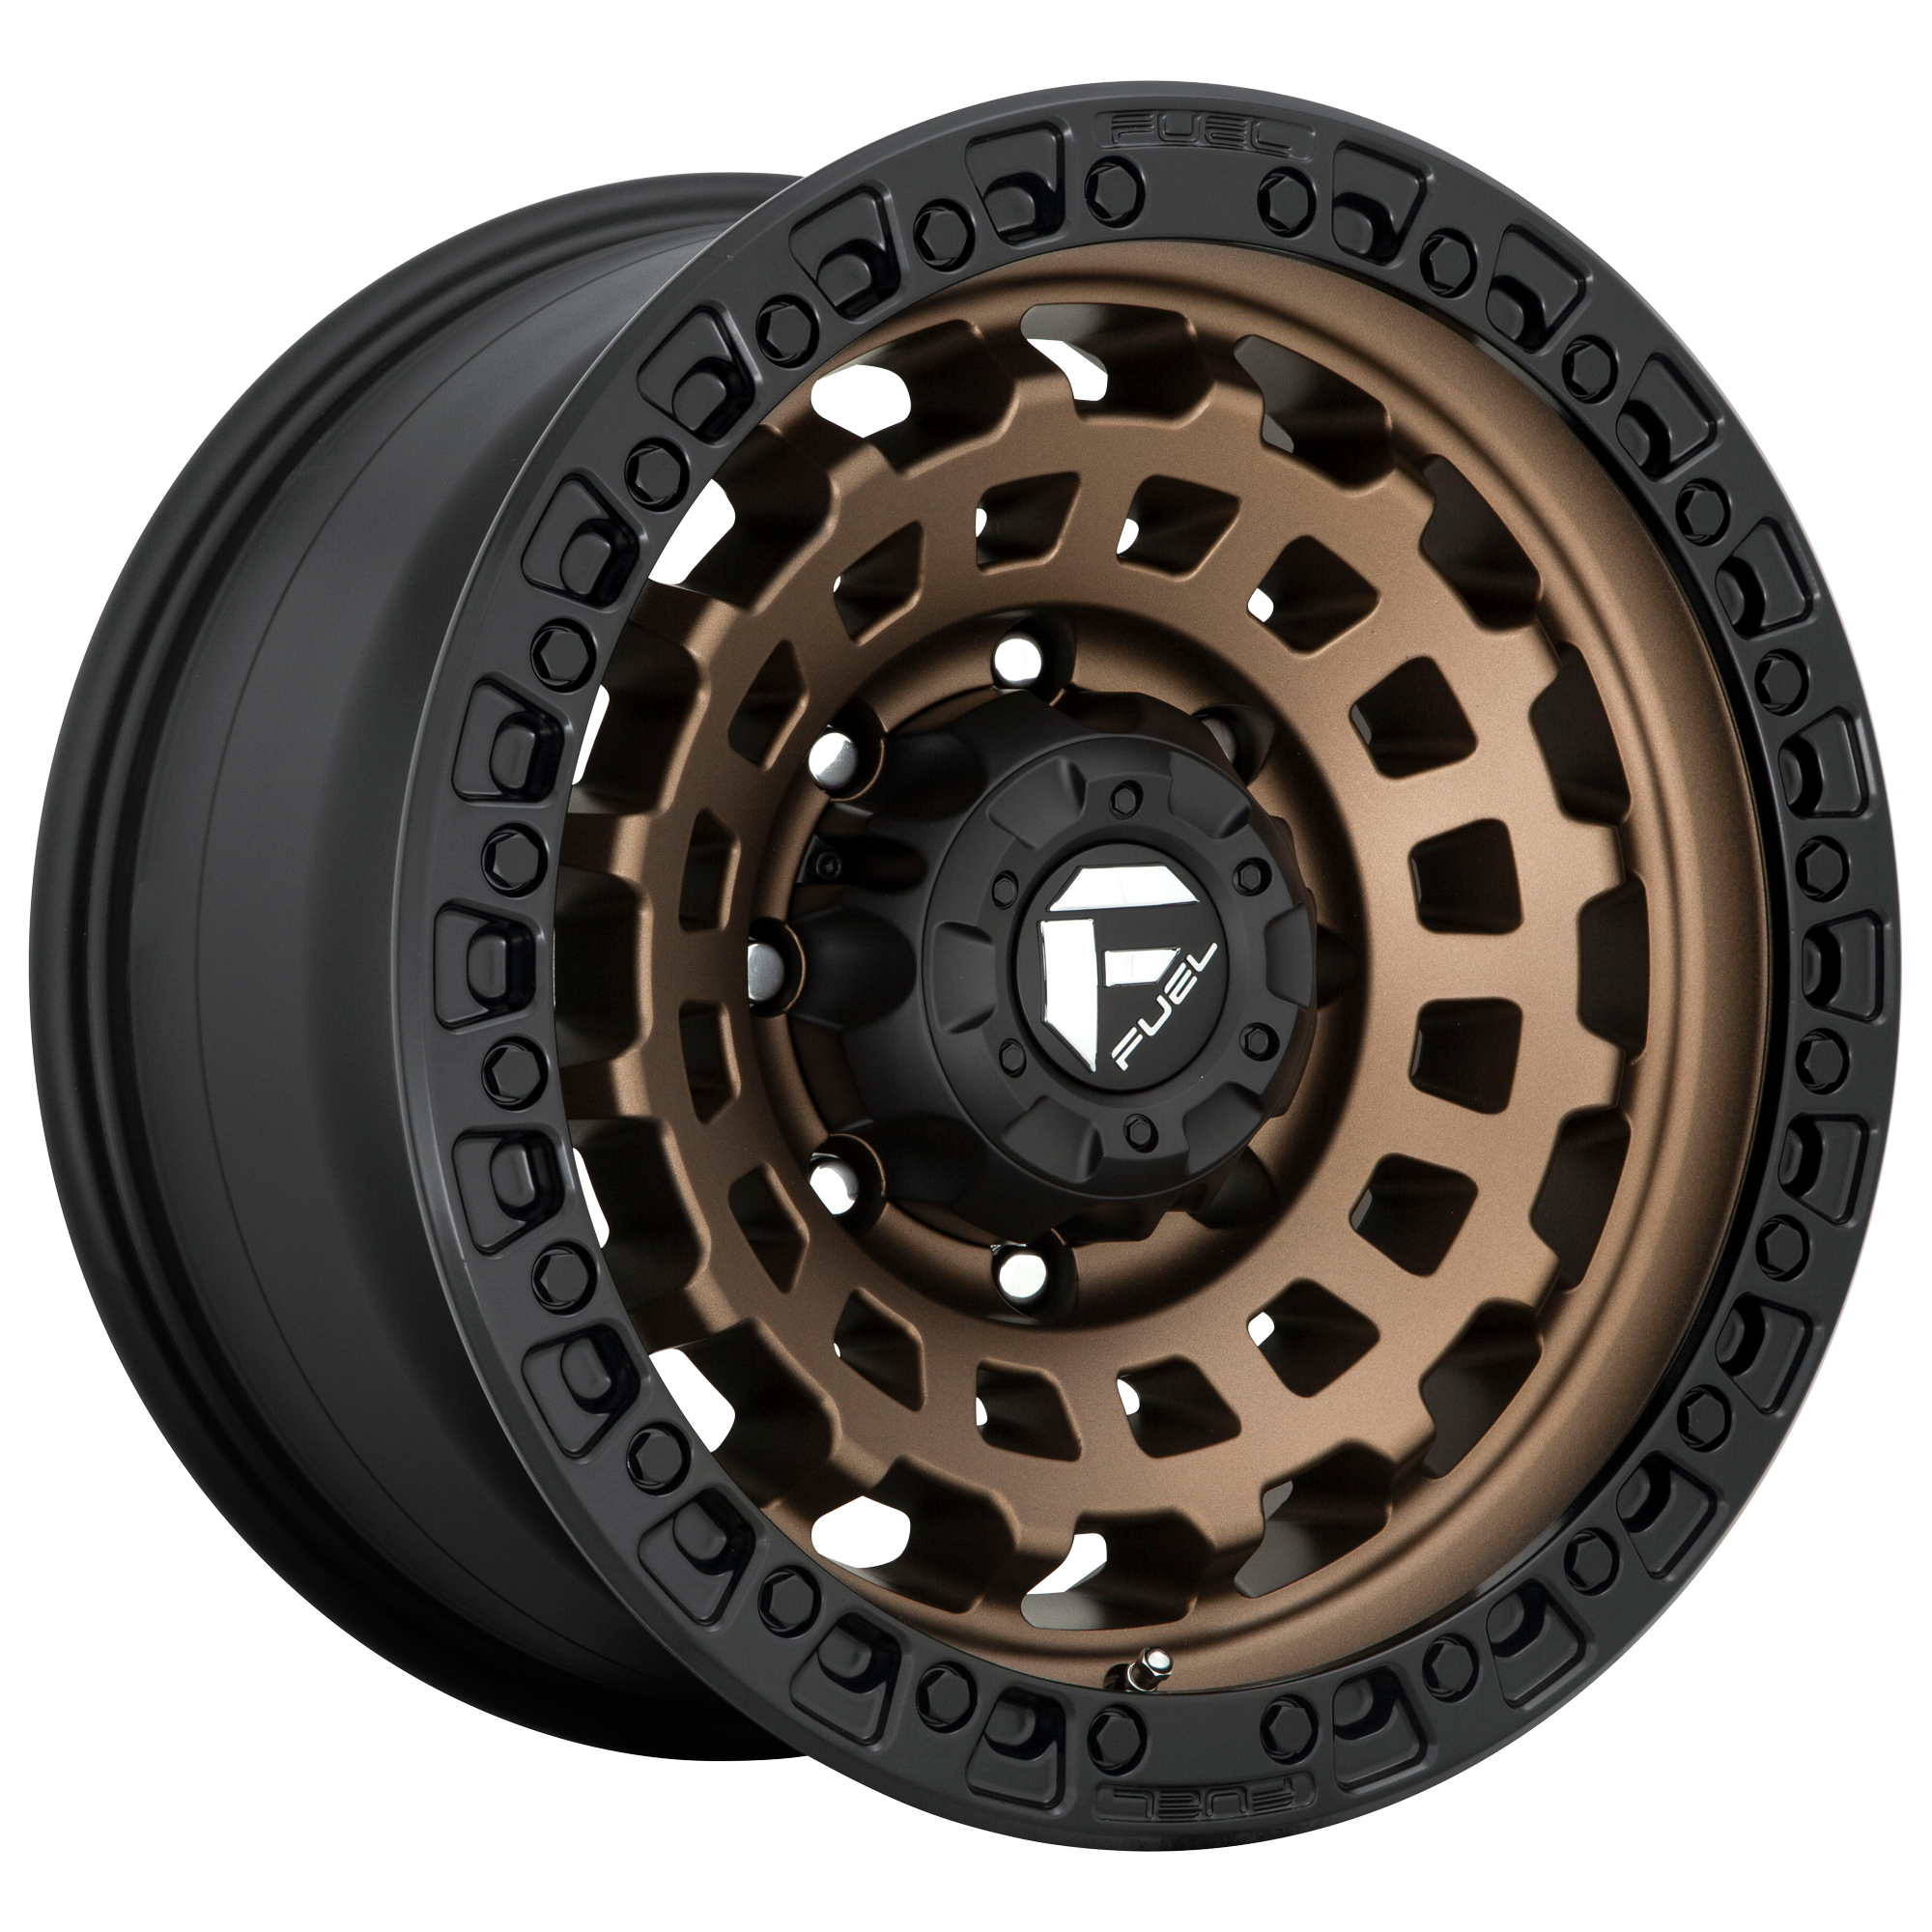 ZEPHYR 17x8 5x114.30 MATTE BRONZE BLACK BEAD RING (38 mm) - Tires and Engine Performance